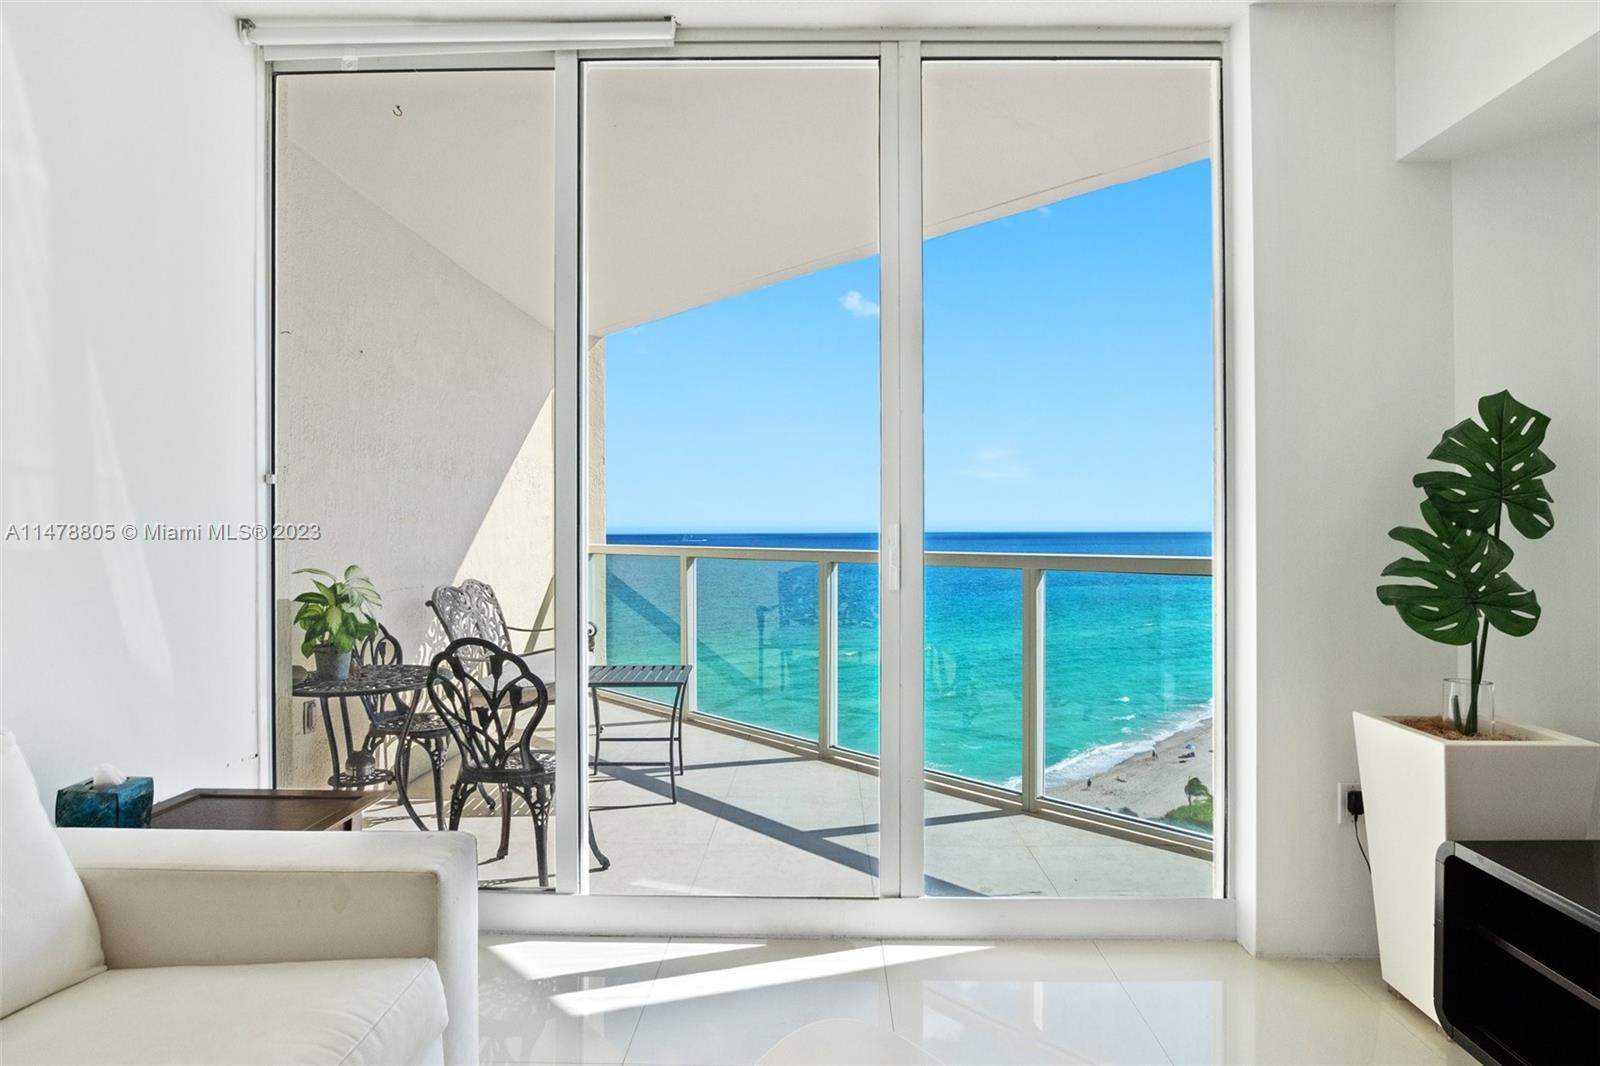 Live in the heart of Sunny Isles in the Florida Riviera. Unique opportunity, only one available 1/1.5 bath with south east exposure to the ocean and intracoastal from 2 balconies. Upgraded large and bright open kitchen with stainless still appliances, ceramic tile, a lot of open closet space, washer & dryer in the unit. 
Luxury amenities, including full beach service, pool, gym, Jacuzzi , kids playroom, pets friendly. Fishing pier with restaurant, walk to all shopping, restaurants, grocery, kids playground, minutes to Aventura Mall, Bal Harbour Shops, FLL airport. Investors welcome - flexible rental policy 12 times a year! Easy to show.